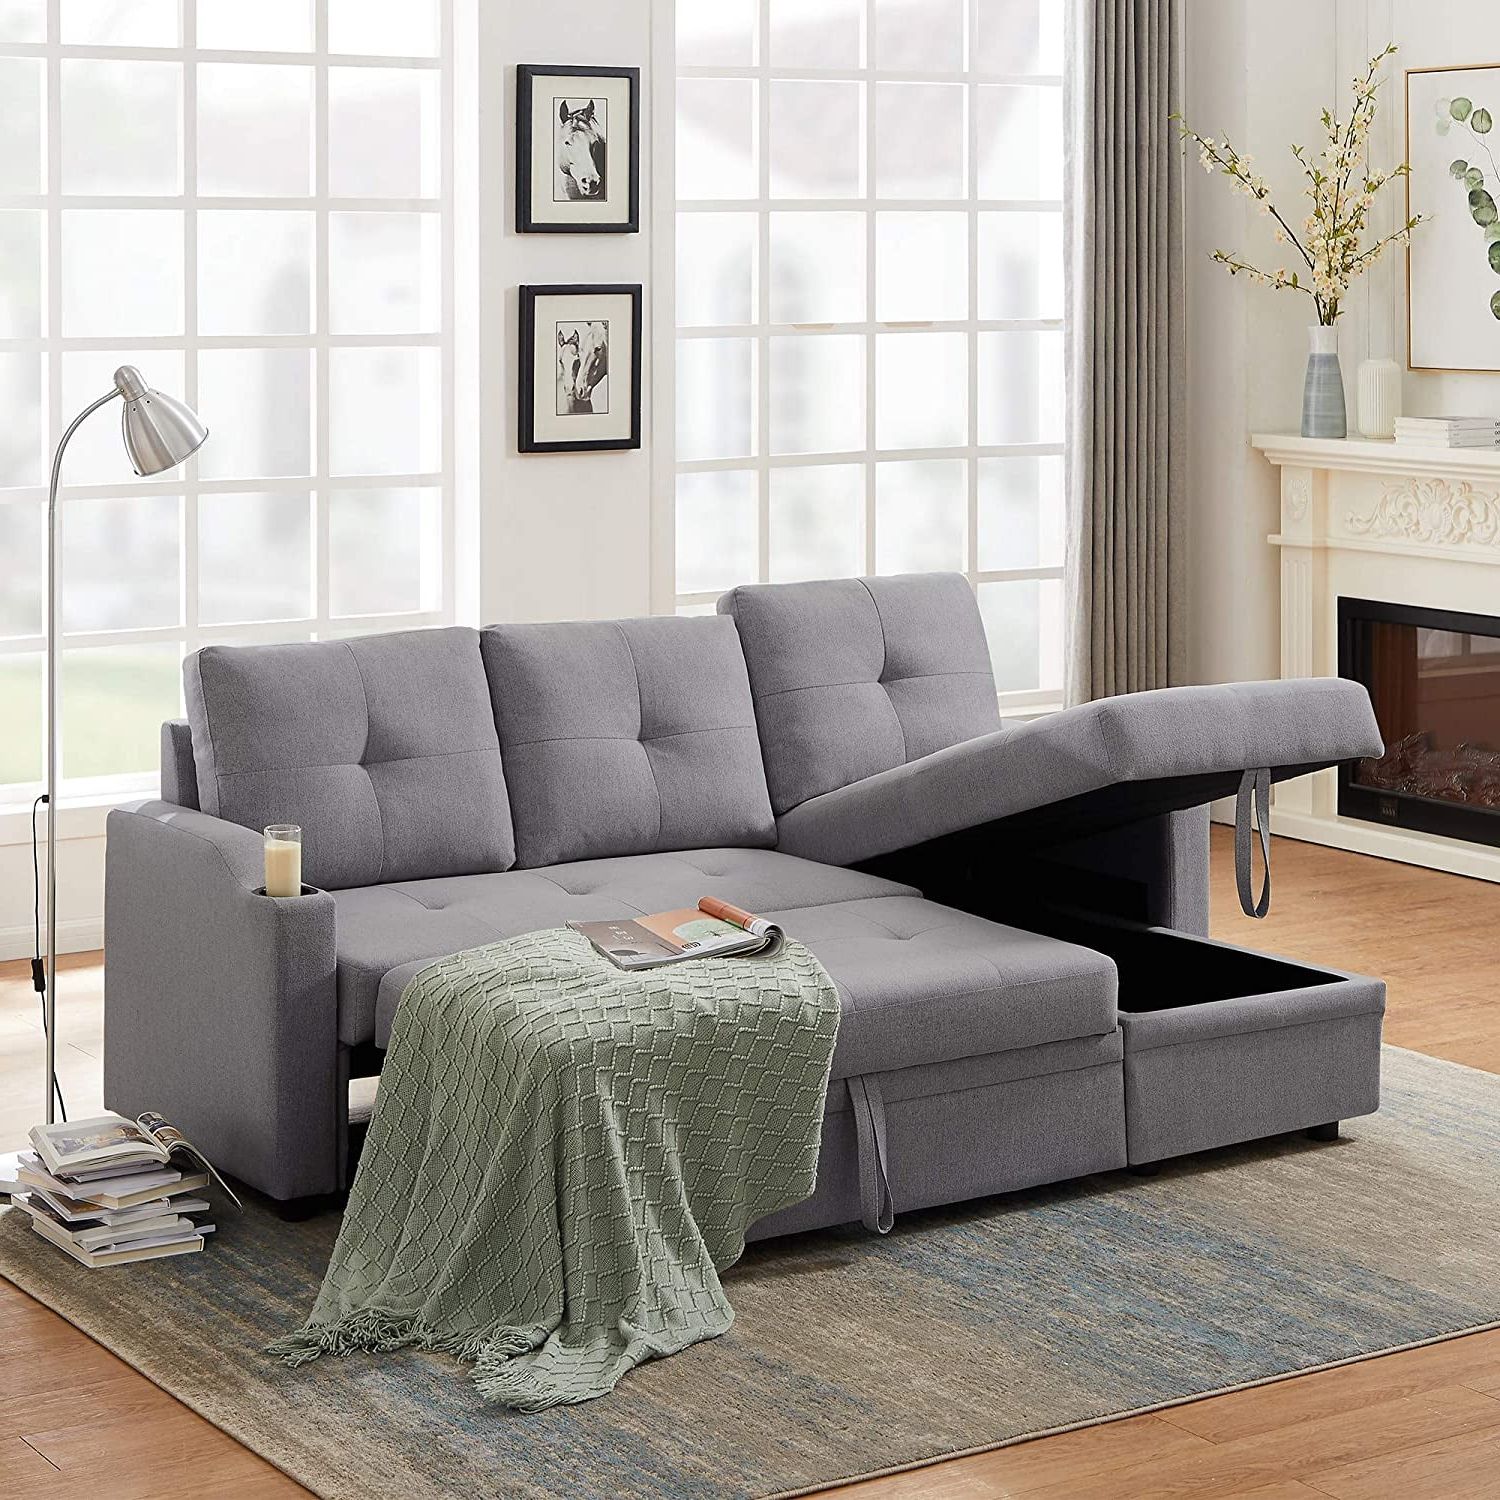 Best And Most Comfortable Sofas With Storage 2022 | Popsugar Home For Sofa Sectionals With Storage (Gallery 9 of 20)